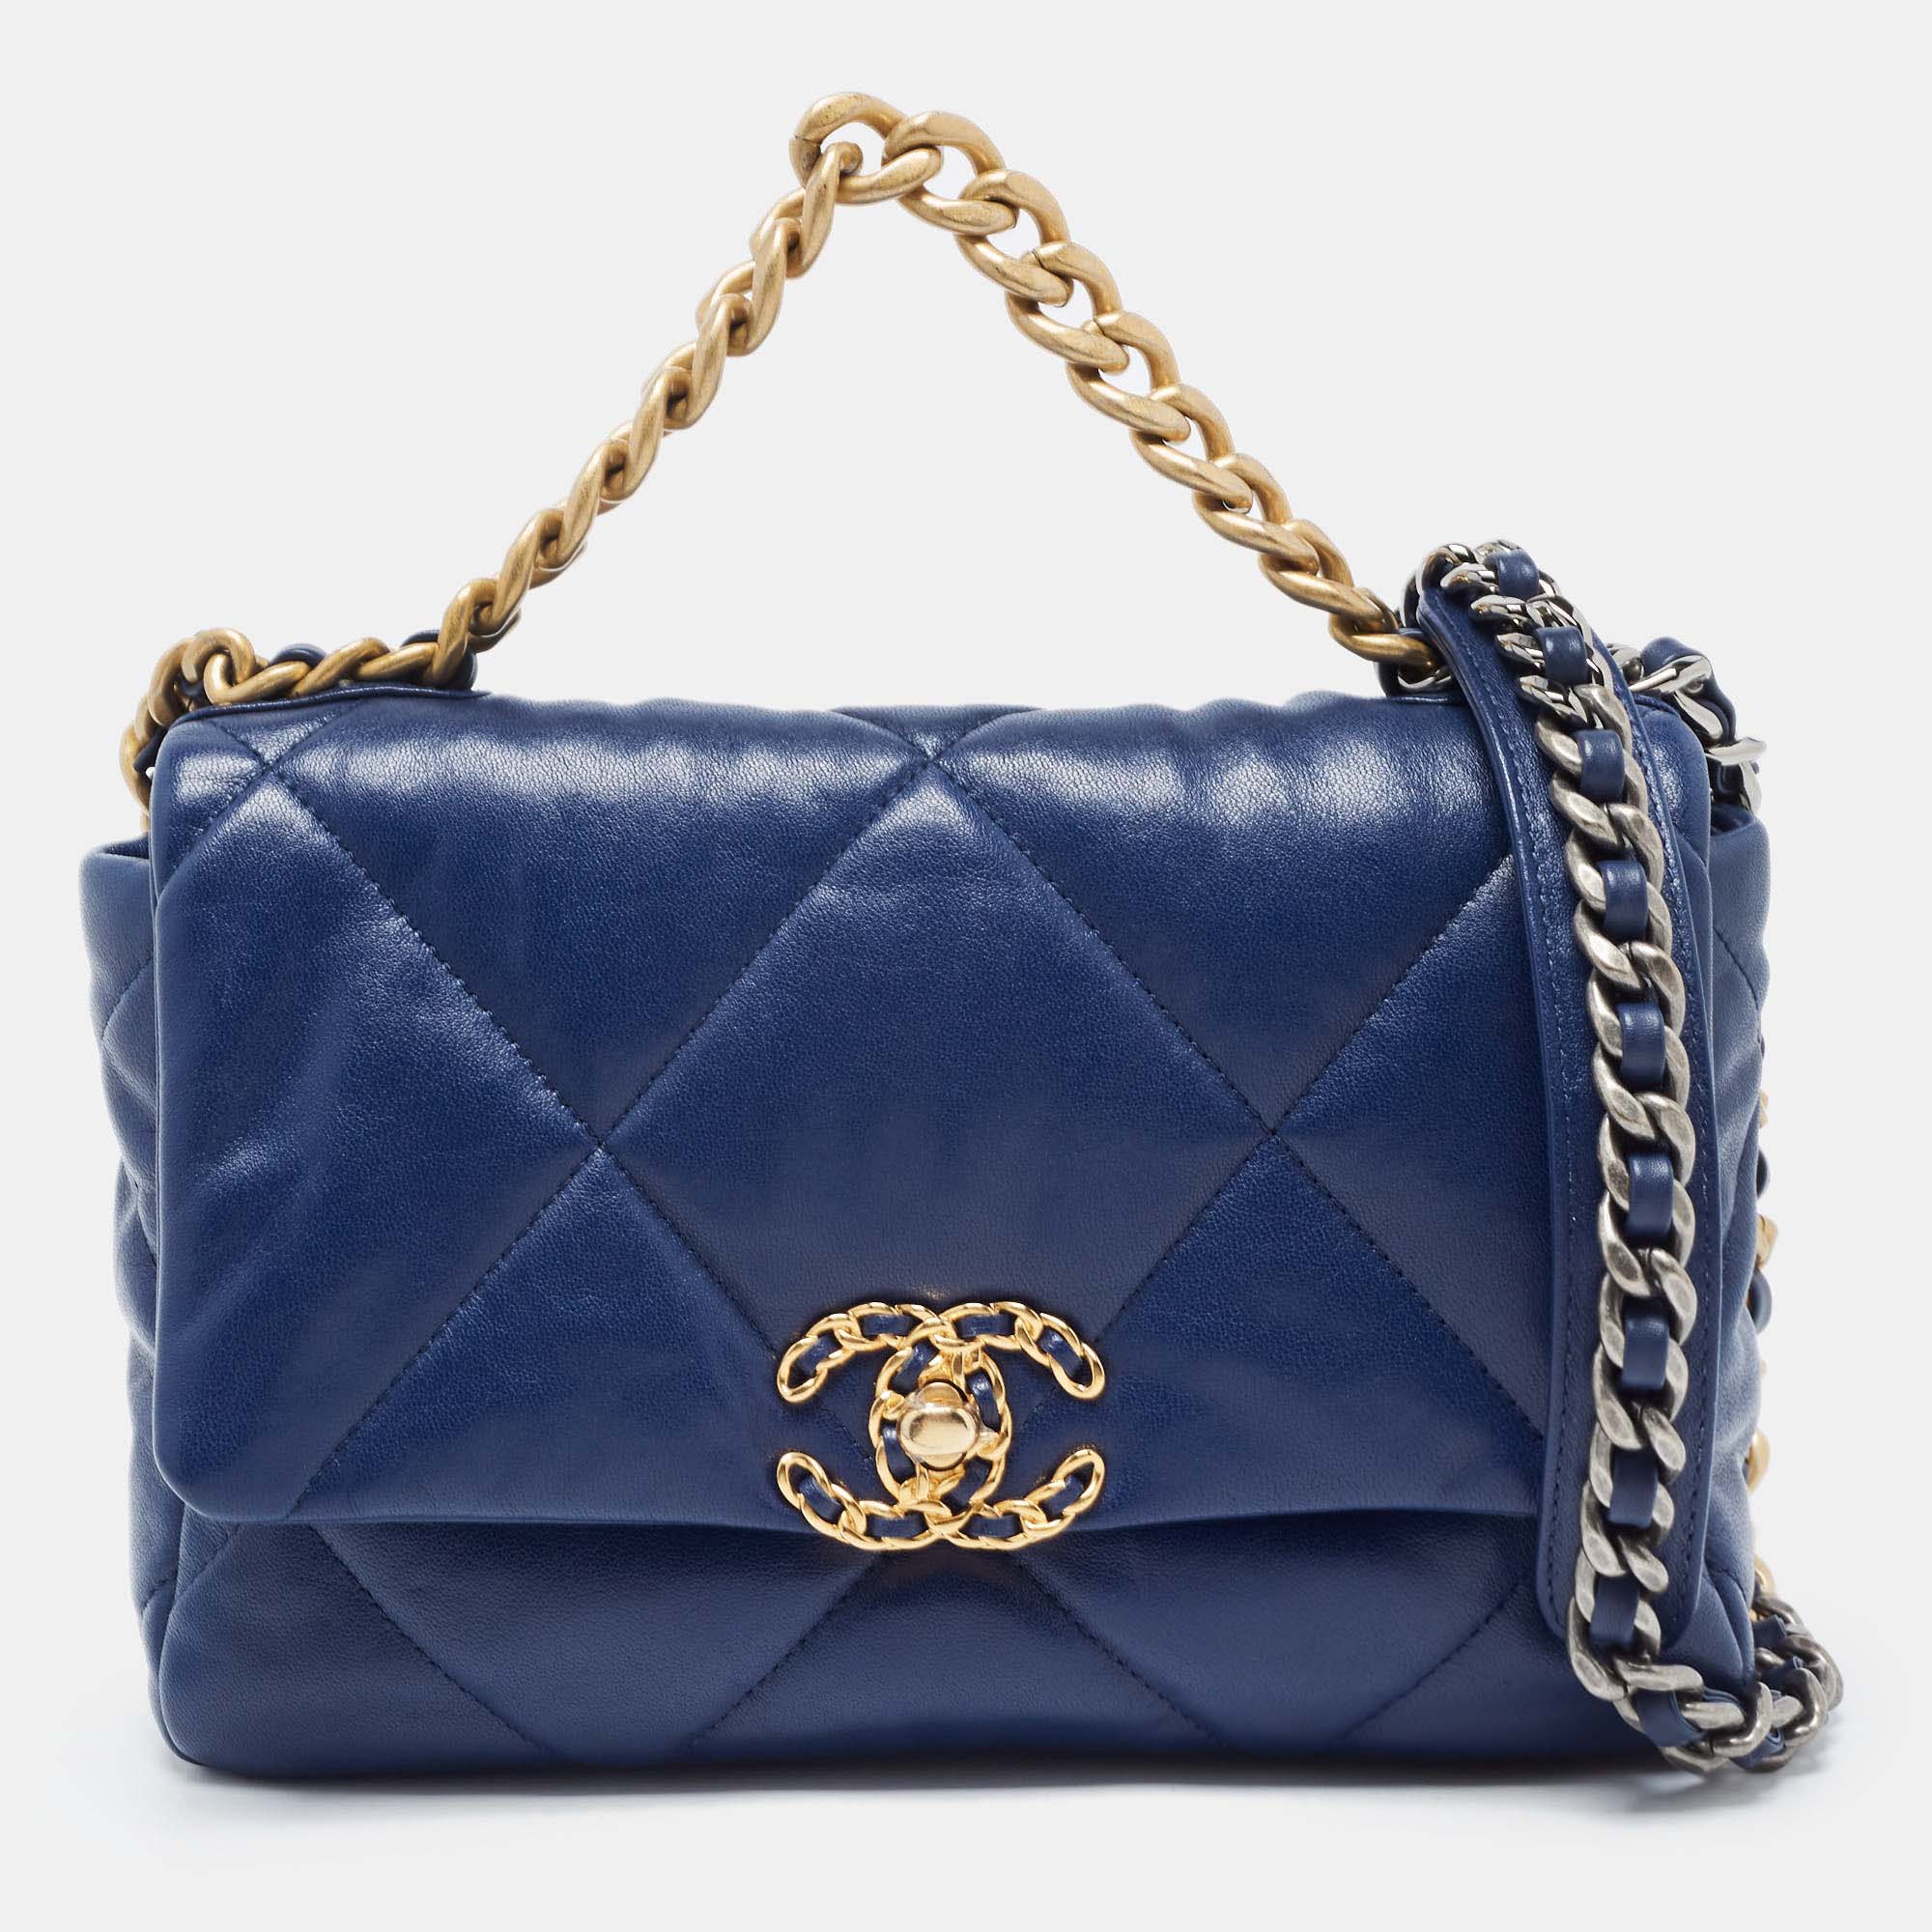 Chanel blue quilted leather medium 19 flap bag